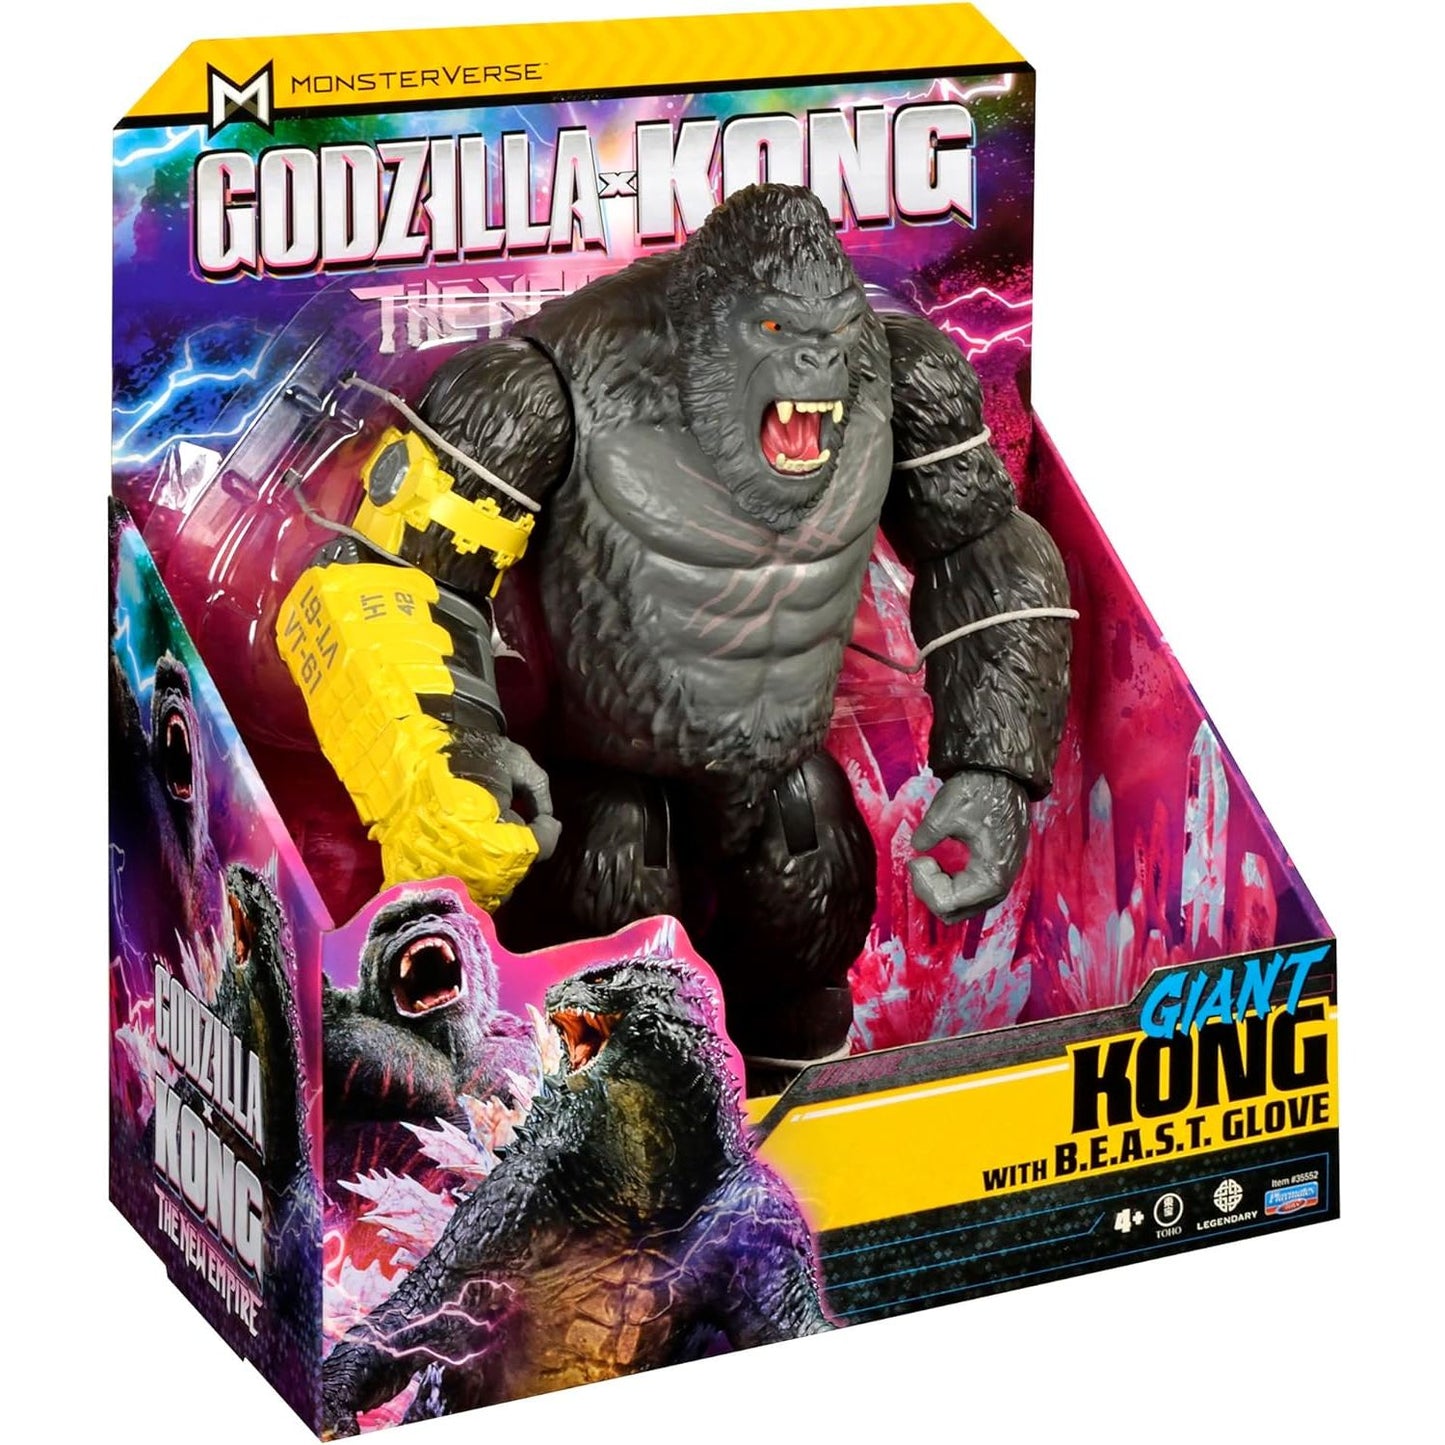 Godzilla X Kong : The New Empire - Giant Kong with B.E.A.S.T Glove - 11 Inch